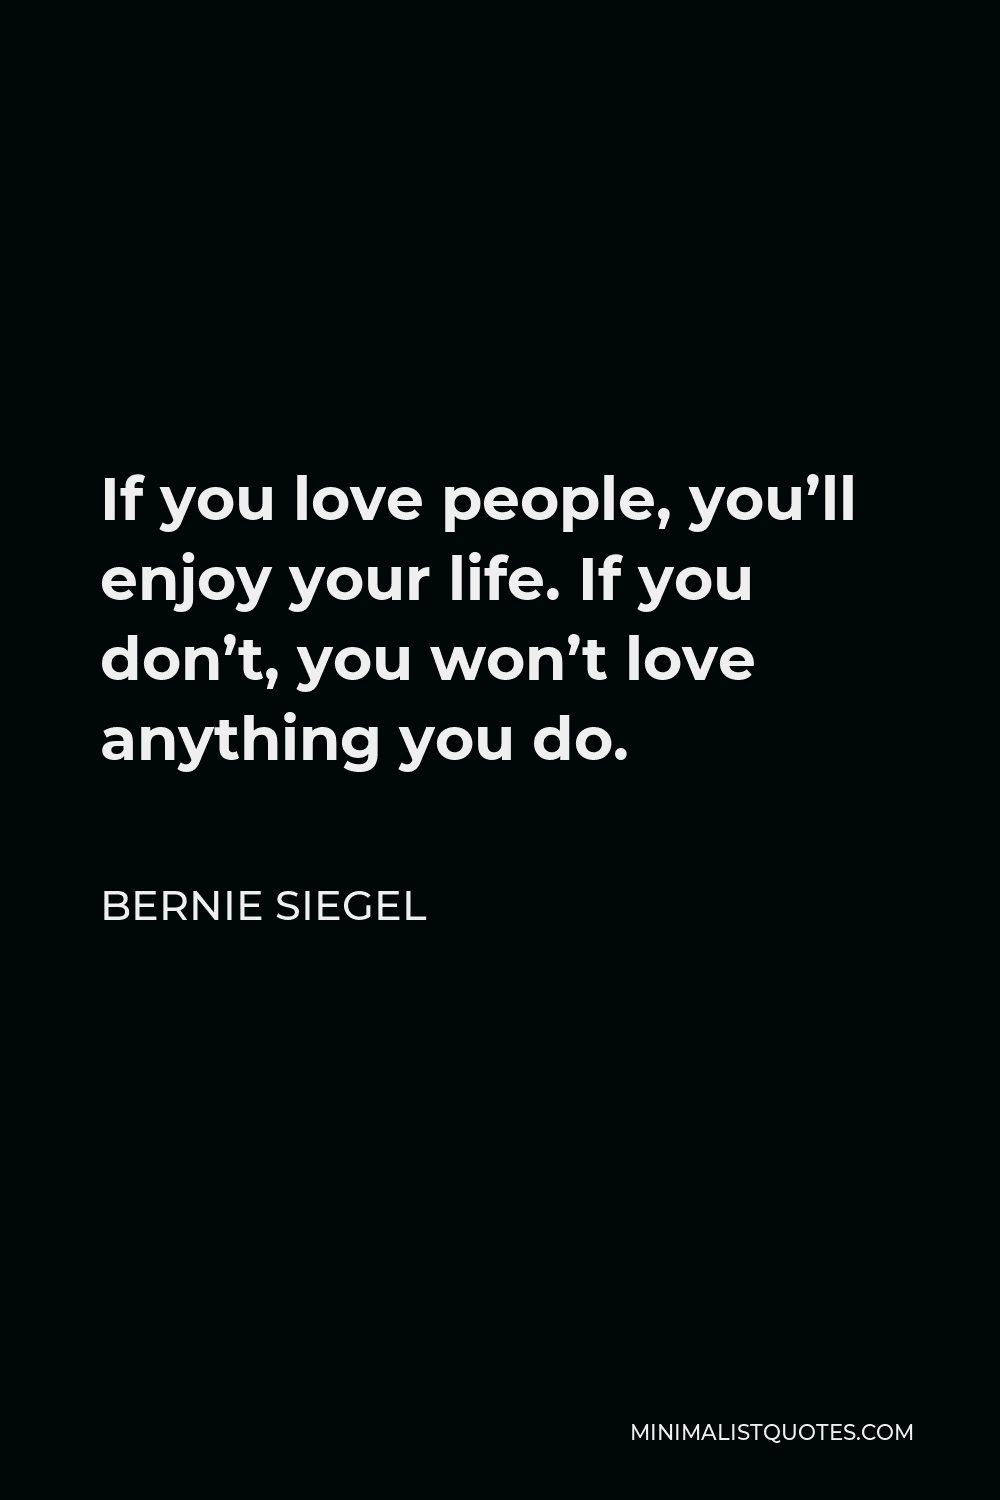 Bernie Siegel Quote - If you love people, you’ll enjoy your life. If you don’t, you won’t love anything you do.